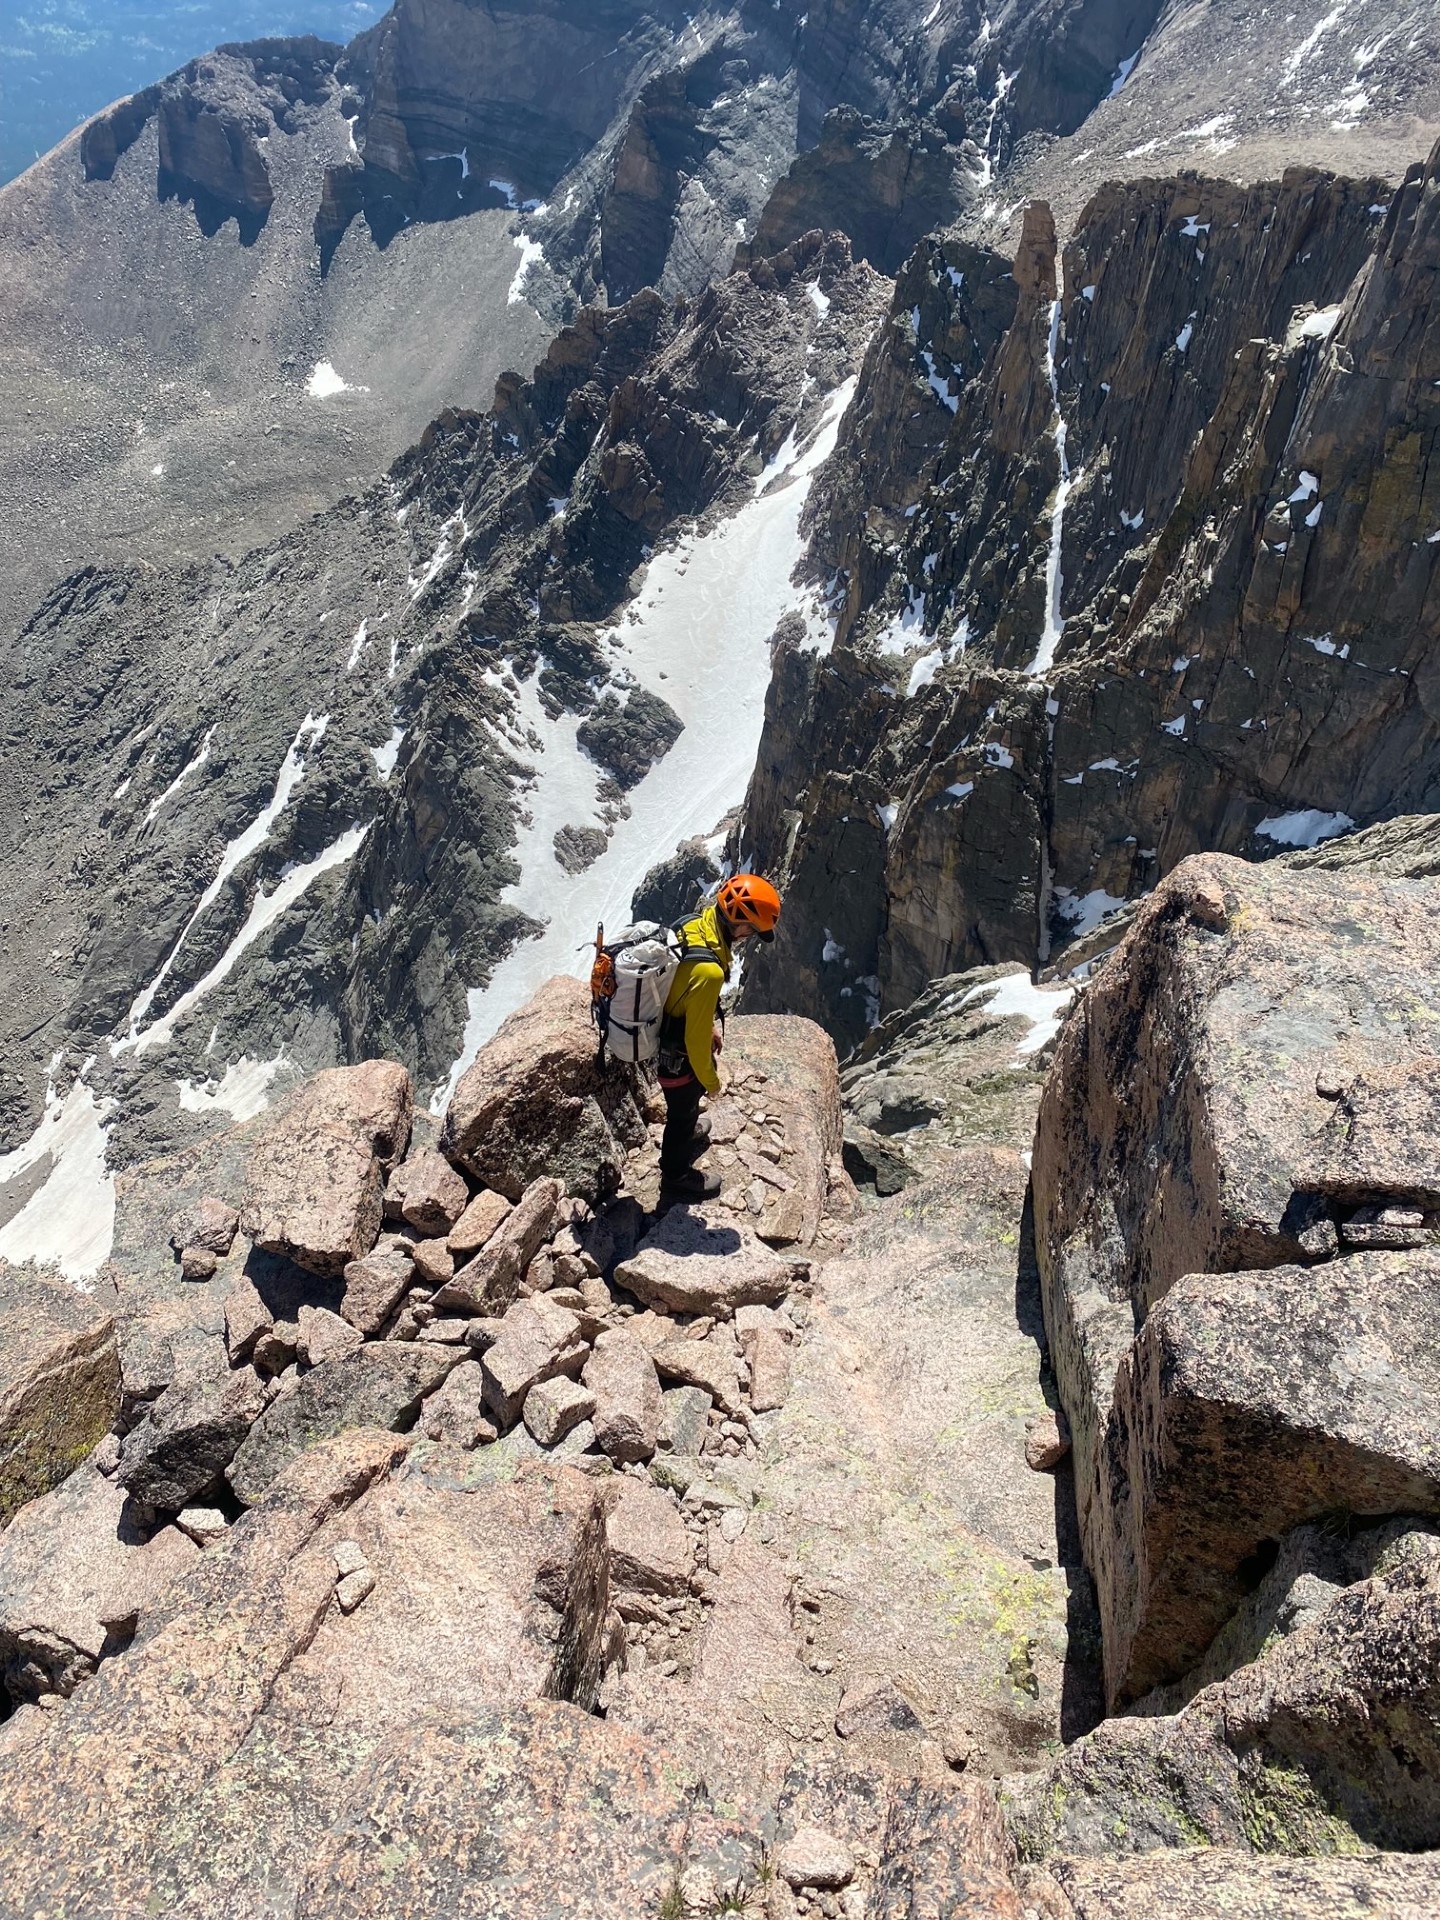 A park ranger is working to help rescue a pair of climbers in technical terrain on Longs Peak